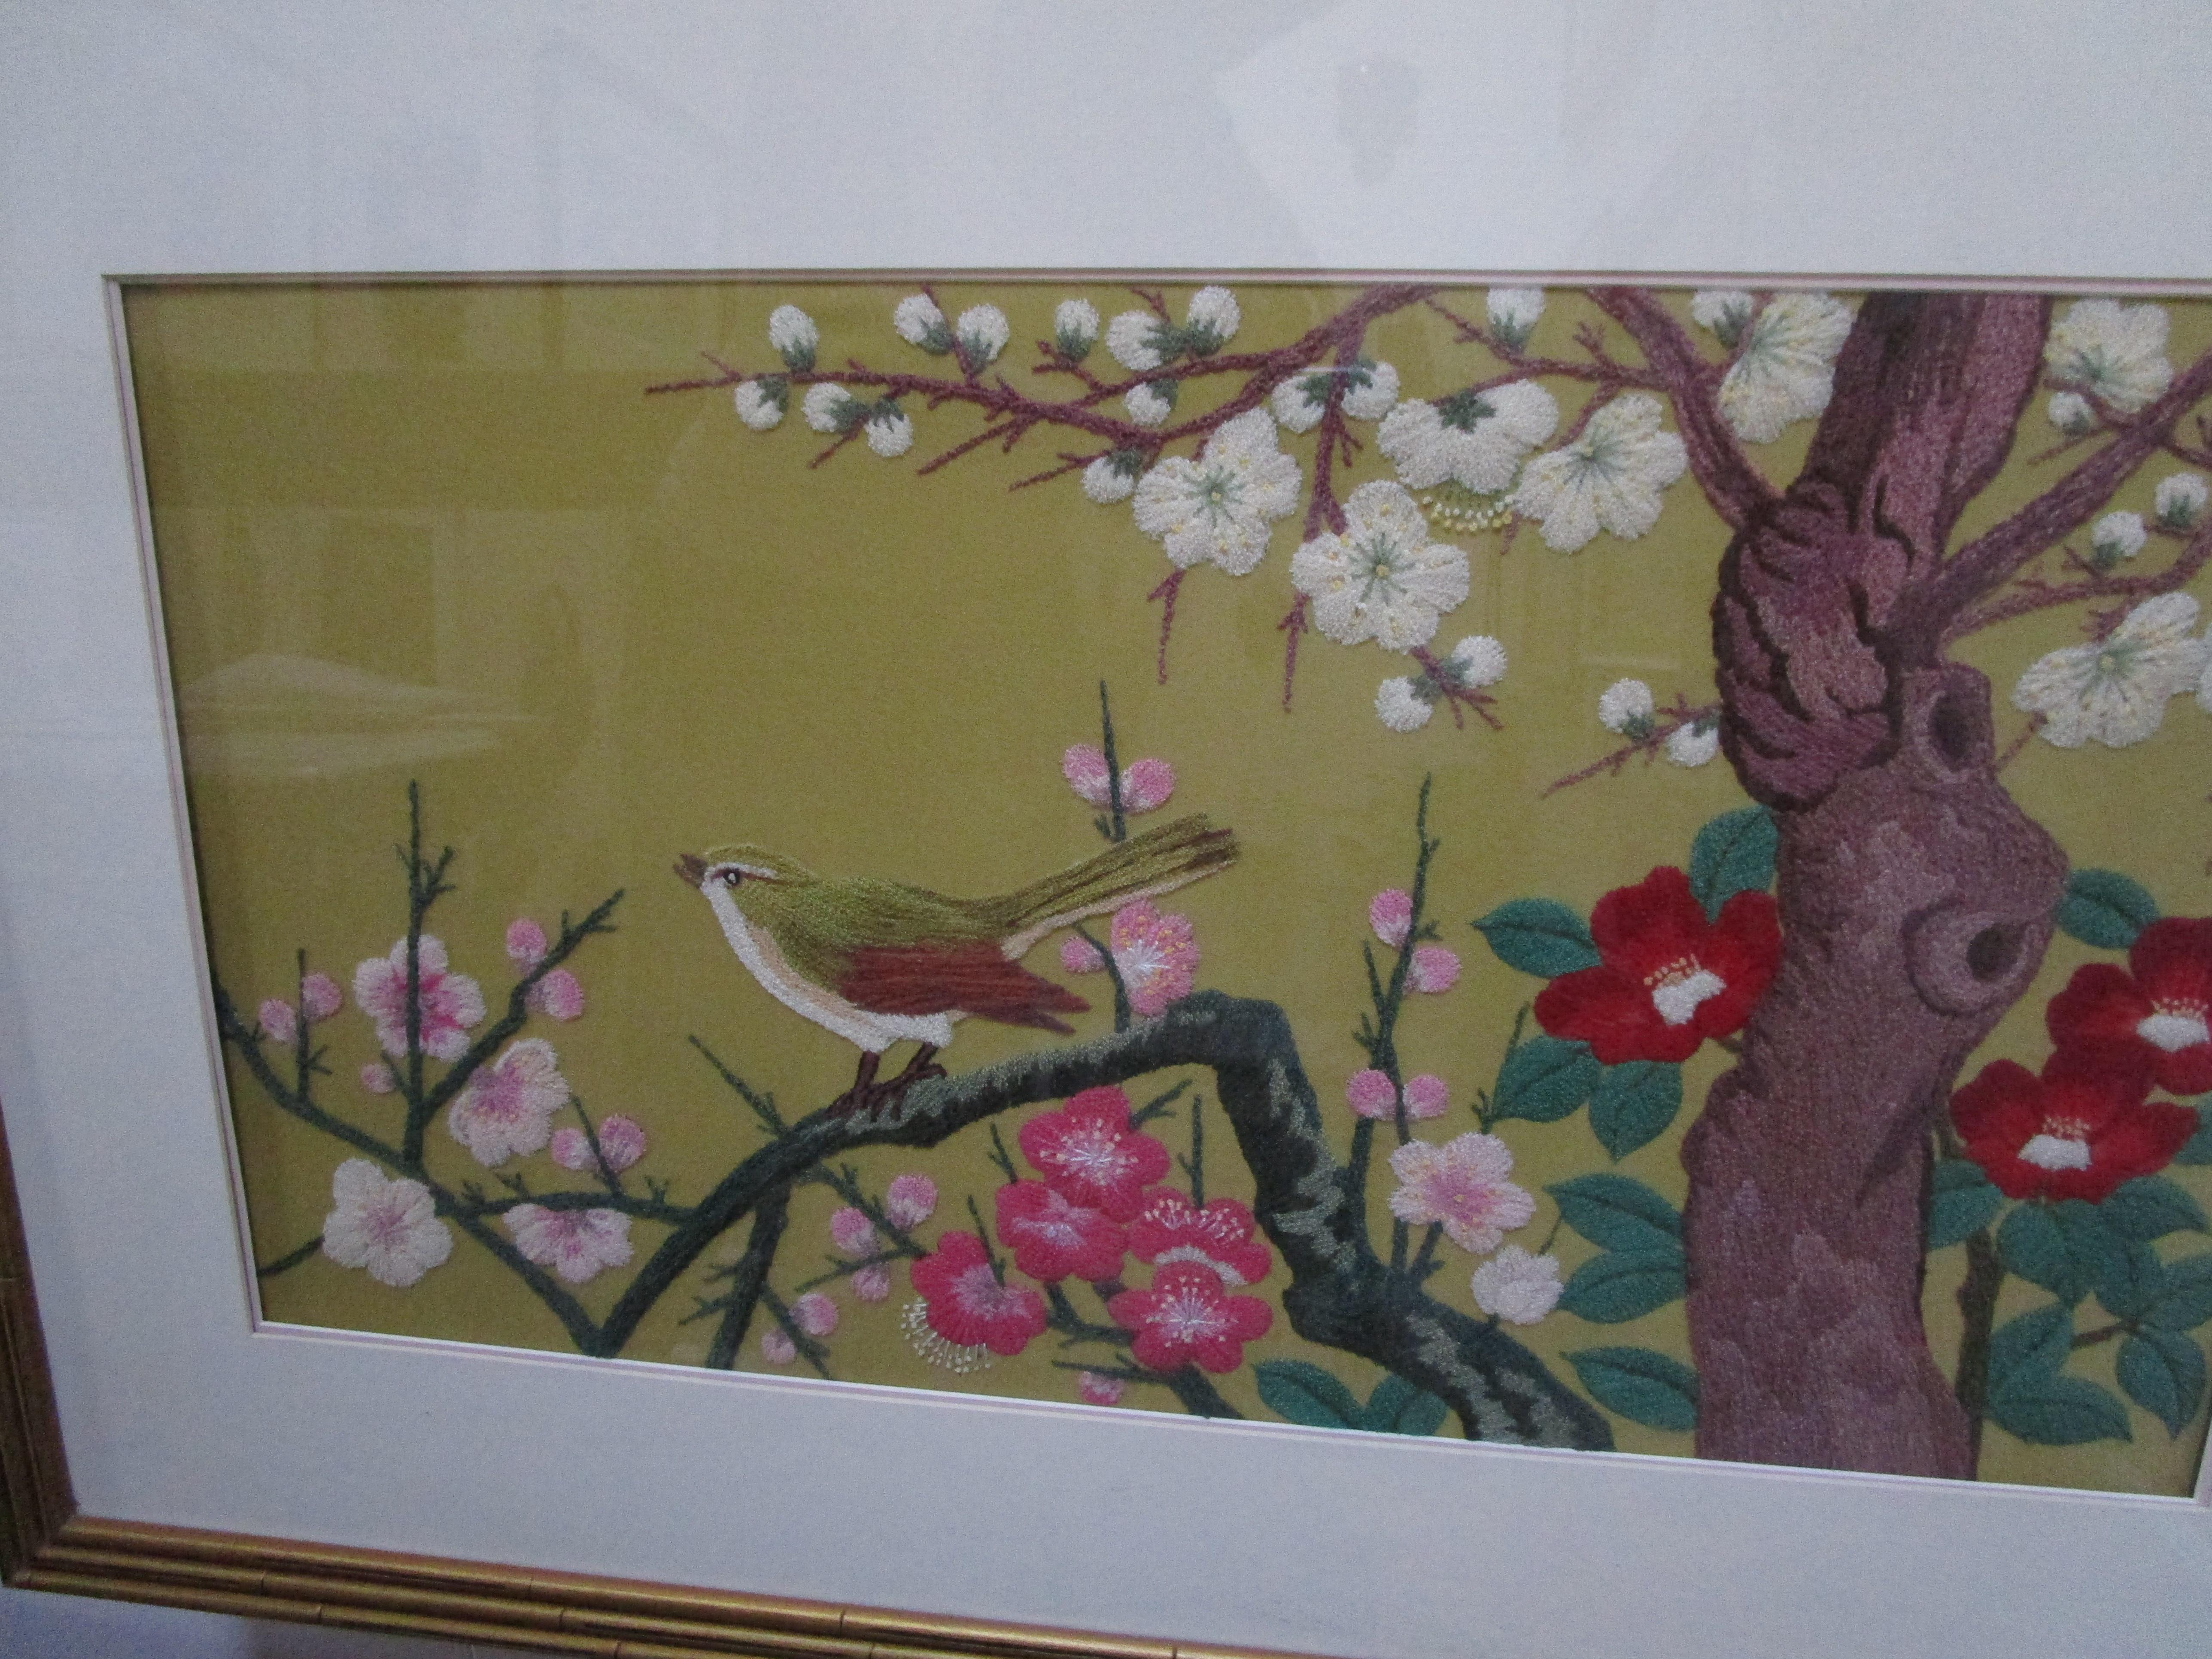 Silk 1940s Chinese Export Needlepoint with Nightingale on Branch with Blooms For Sale 3